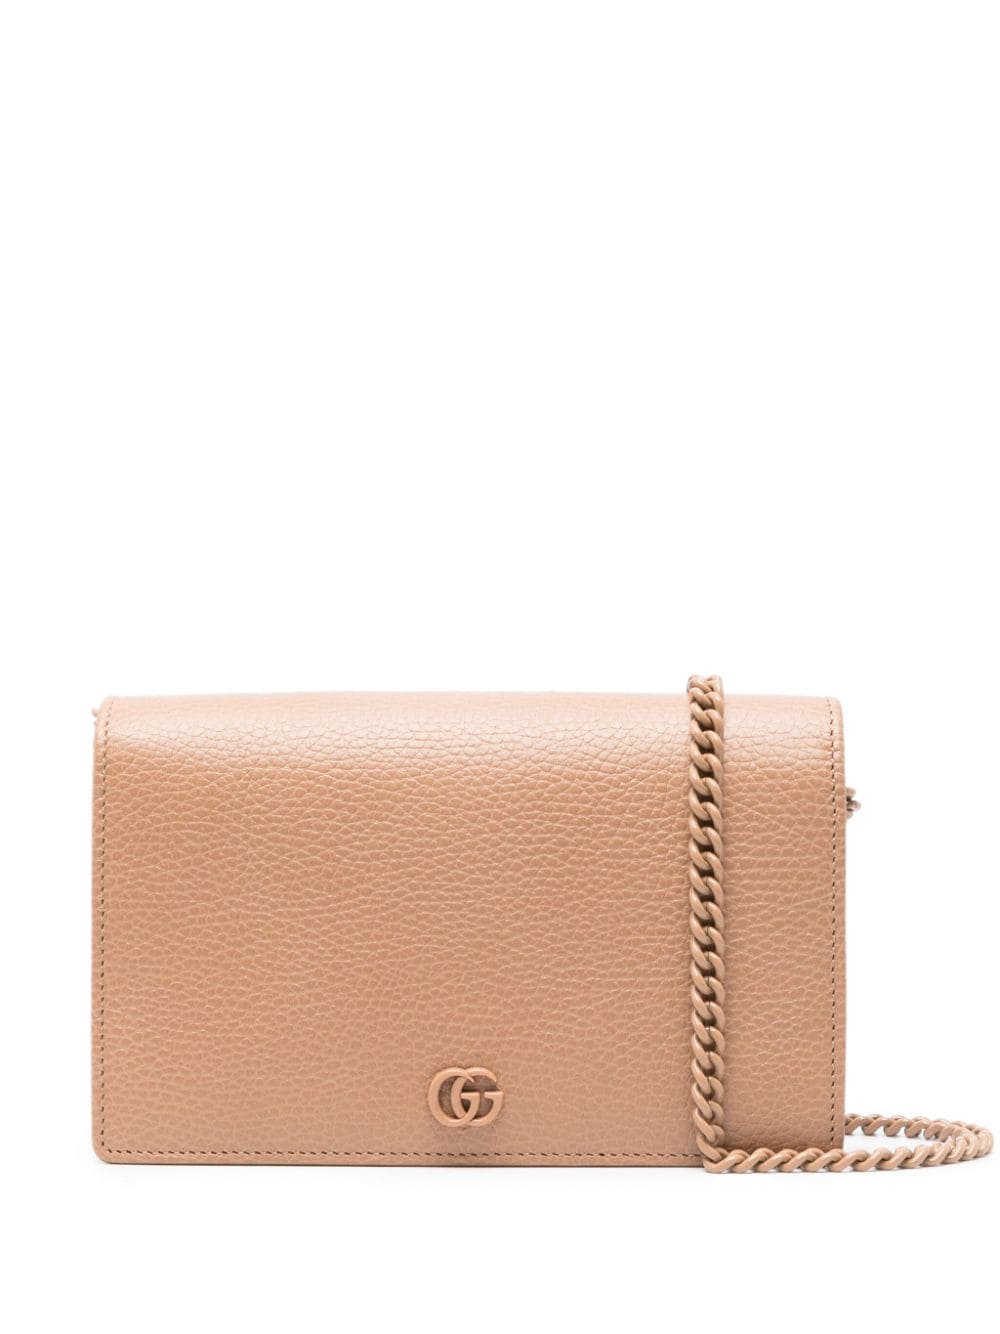 Image 1 of Gucci cartera GG Marmont